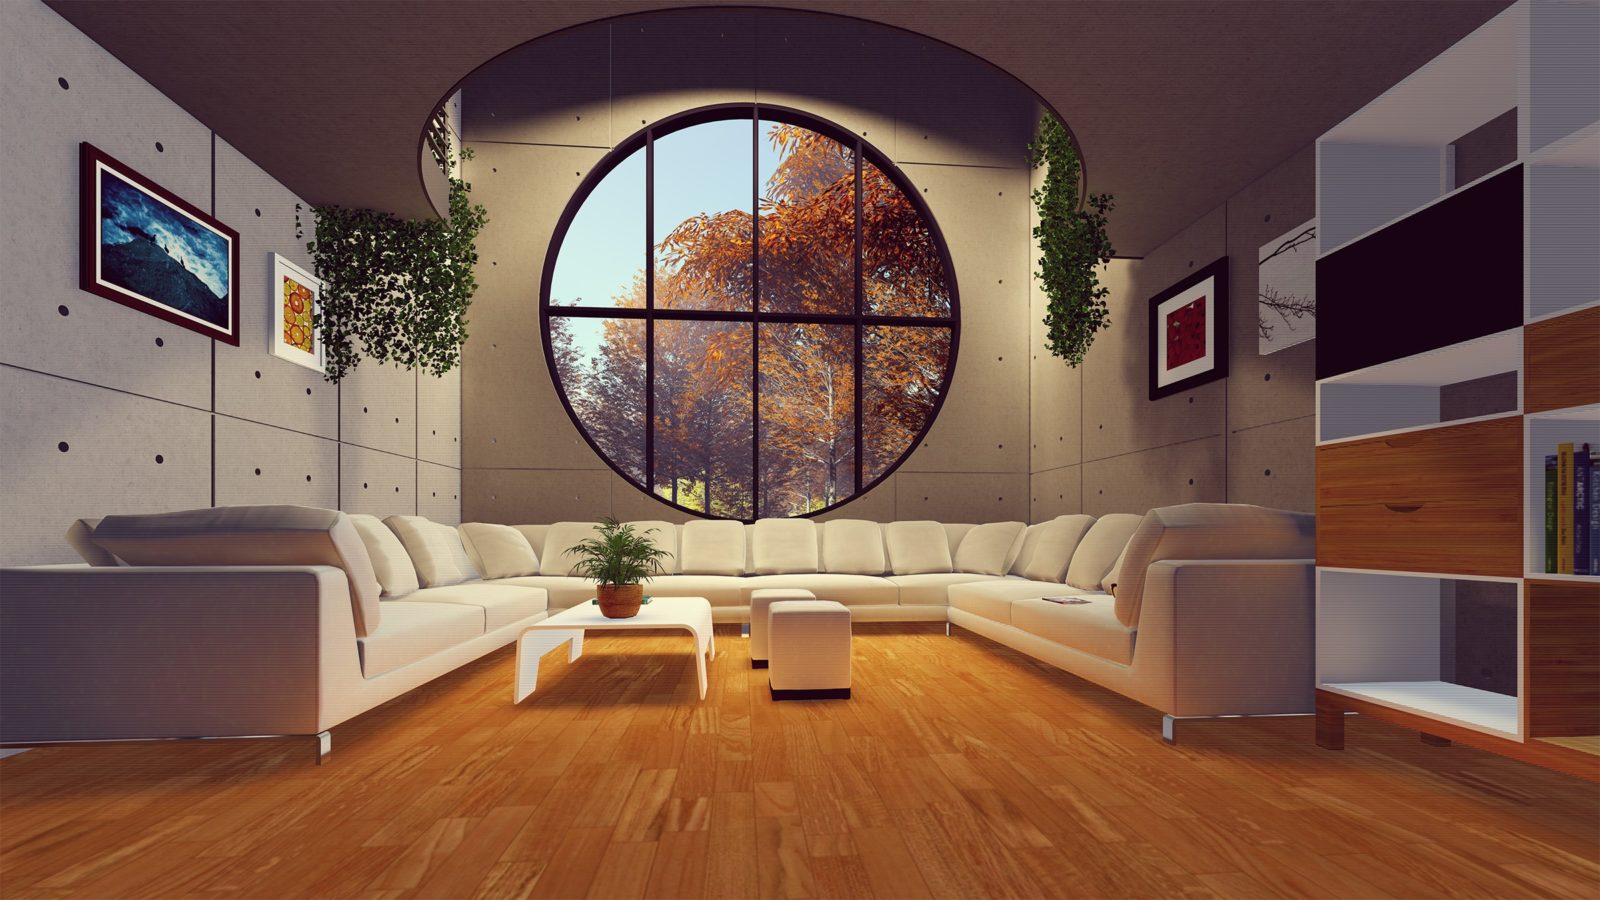 Cosy room with large round window and timber flooring